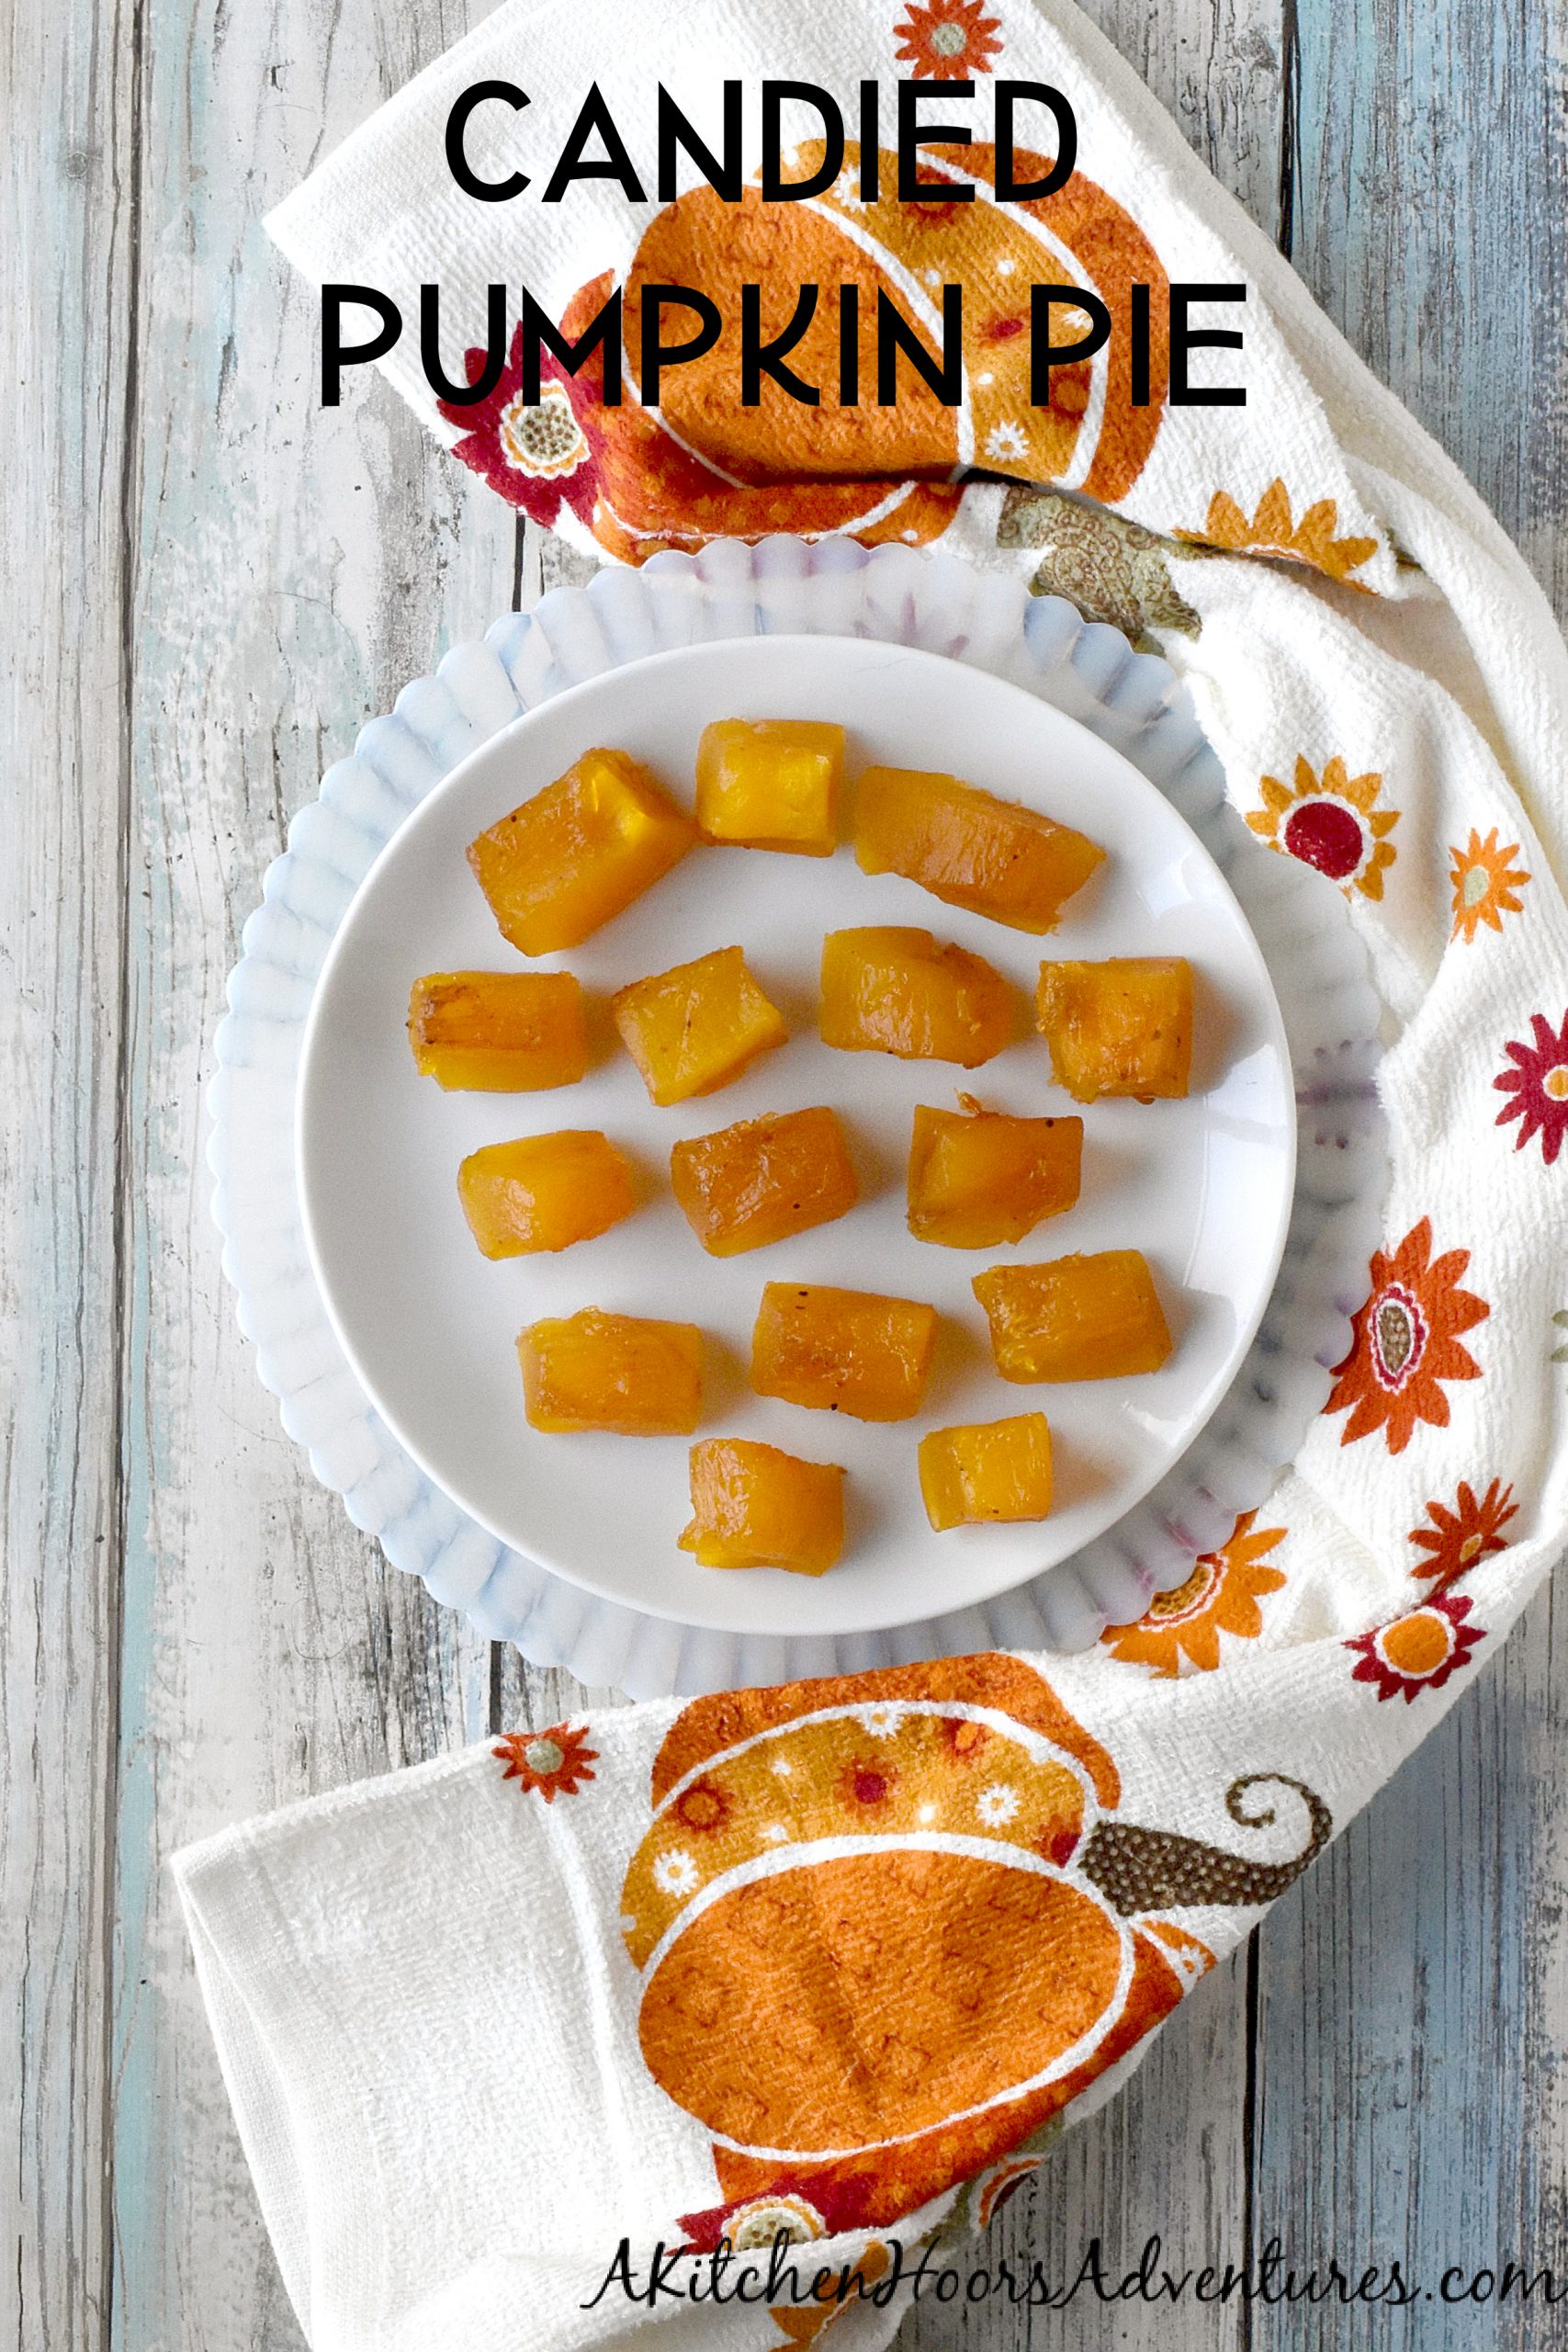 Candied Pumpkin Pie tastes like a bite of pie without all the calories! This is simply pumpkin, water, sugar, and spices #PumpkinWeek